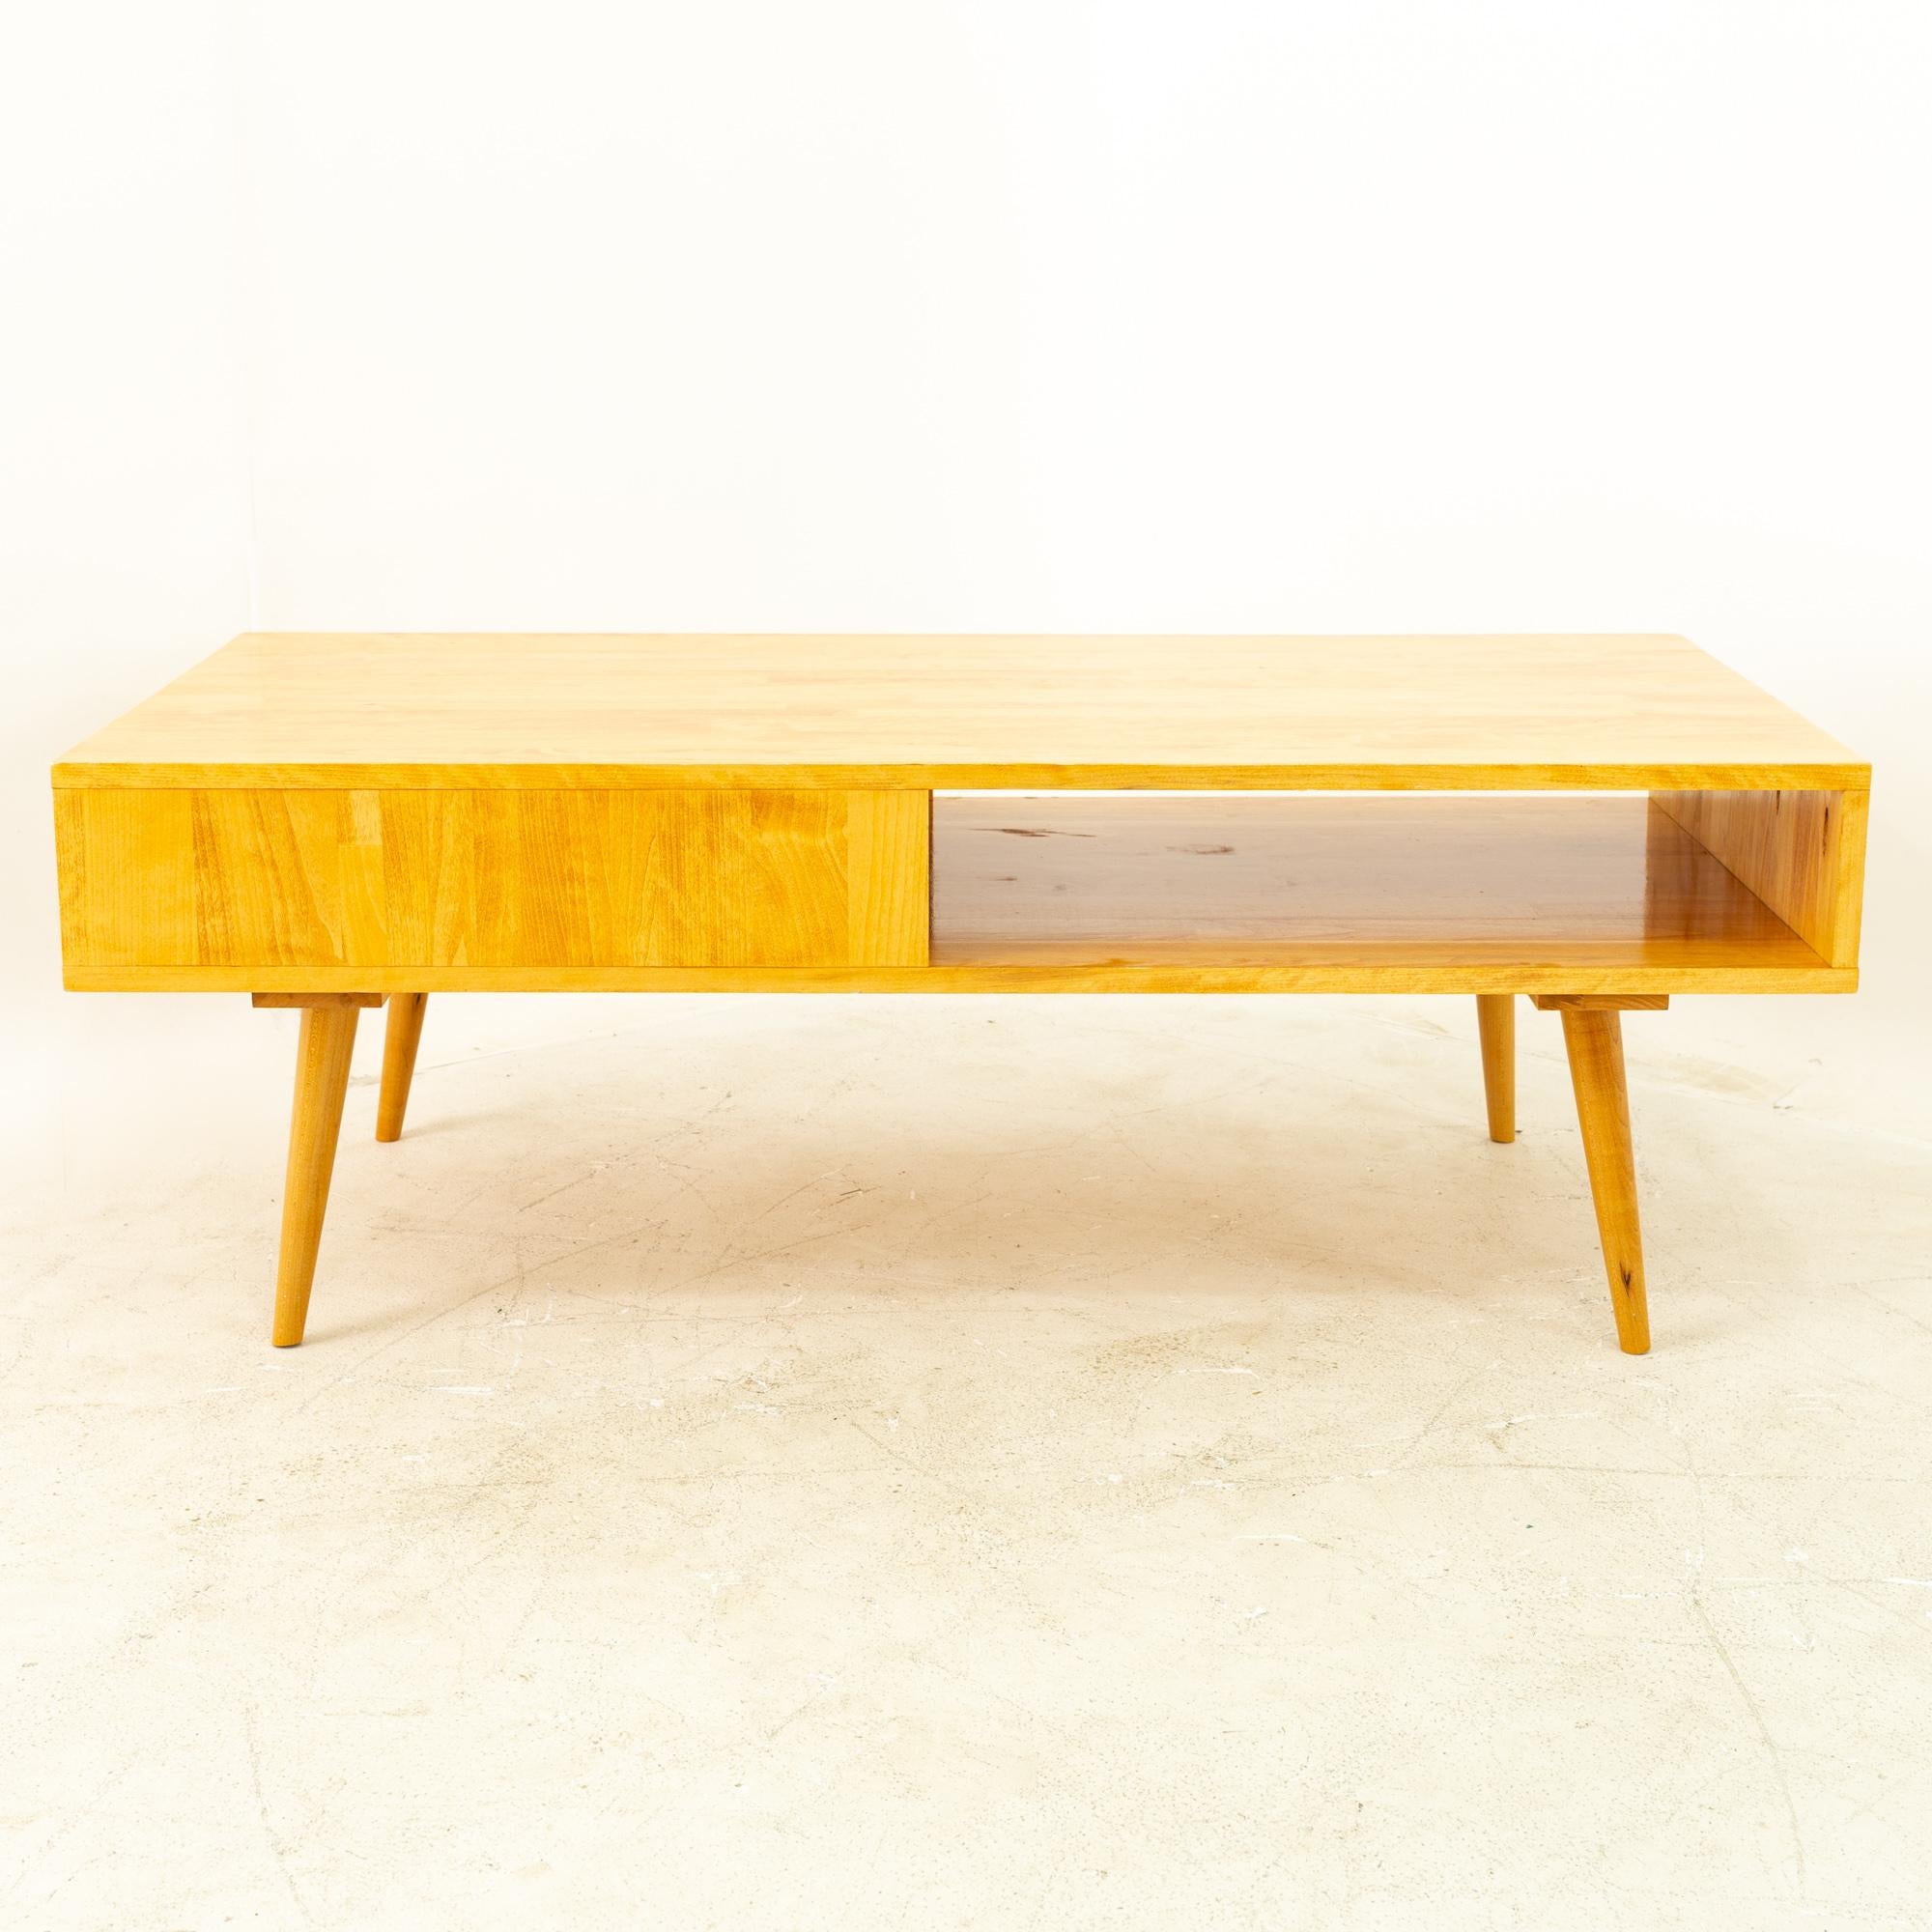 Paul McCobb Style Mid Century Blonde Coffee Table 
50 wide x 24.25 deep x 17.75 high

All pieces of furniture can be had in what we call Restored Vintage Condition. This means the piece is restored upon purchase so it’s free of watermarks, chips or